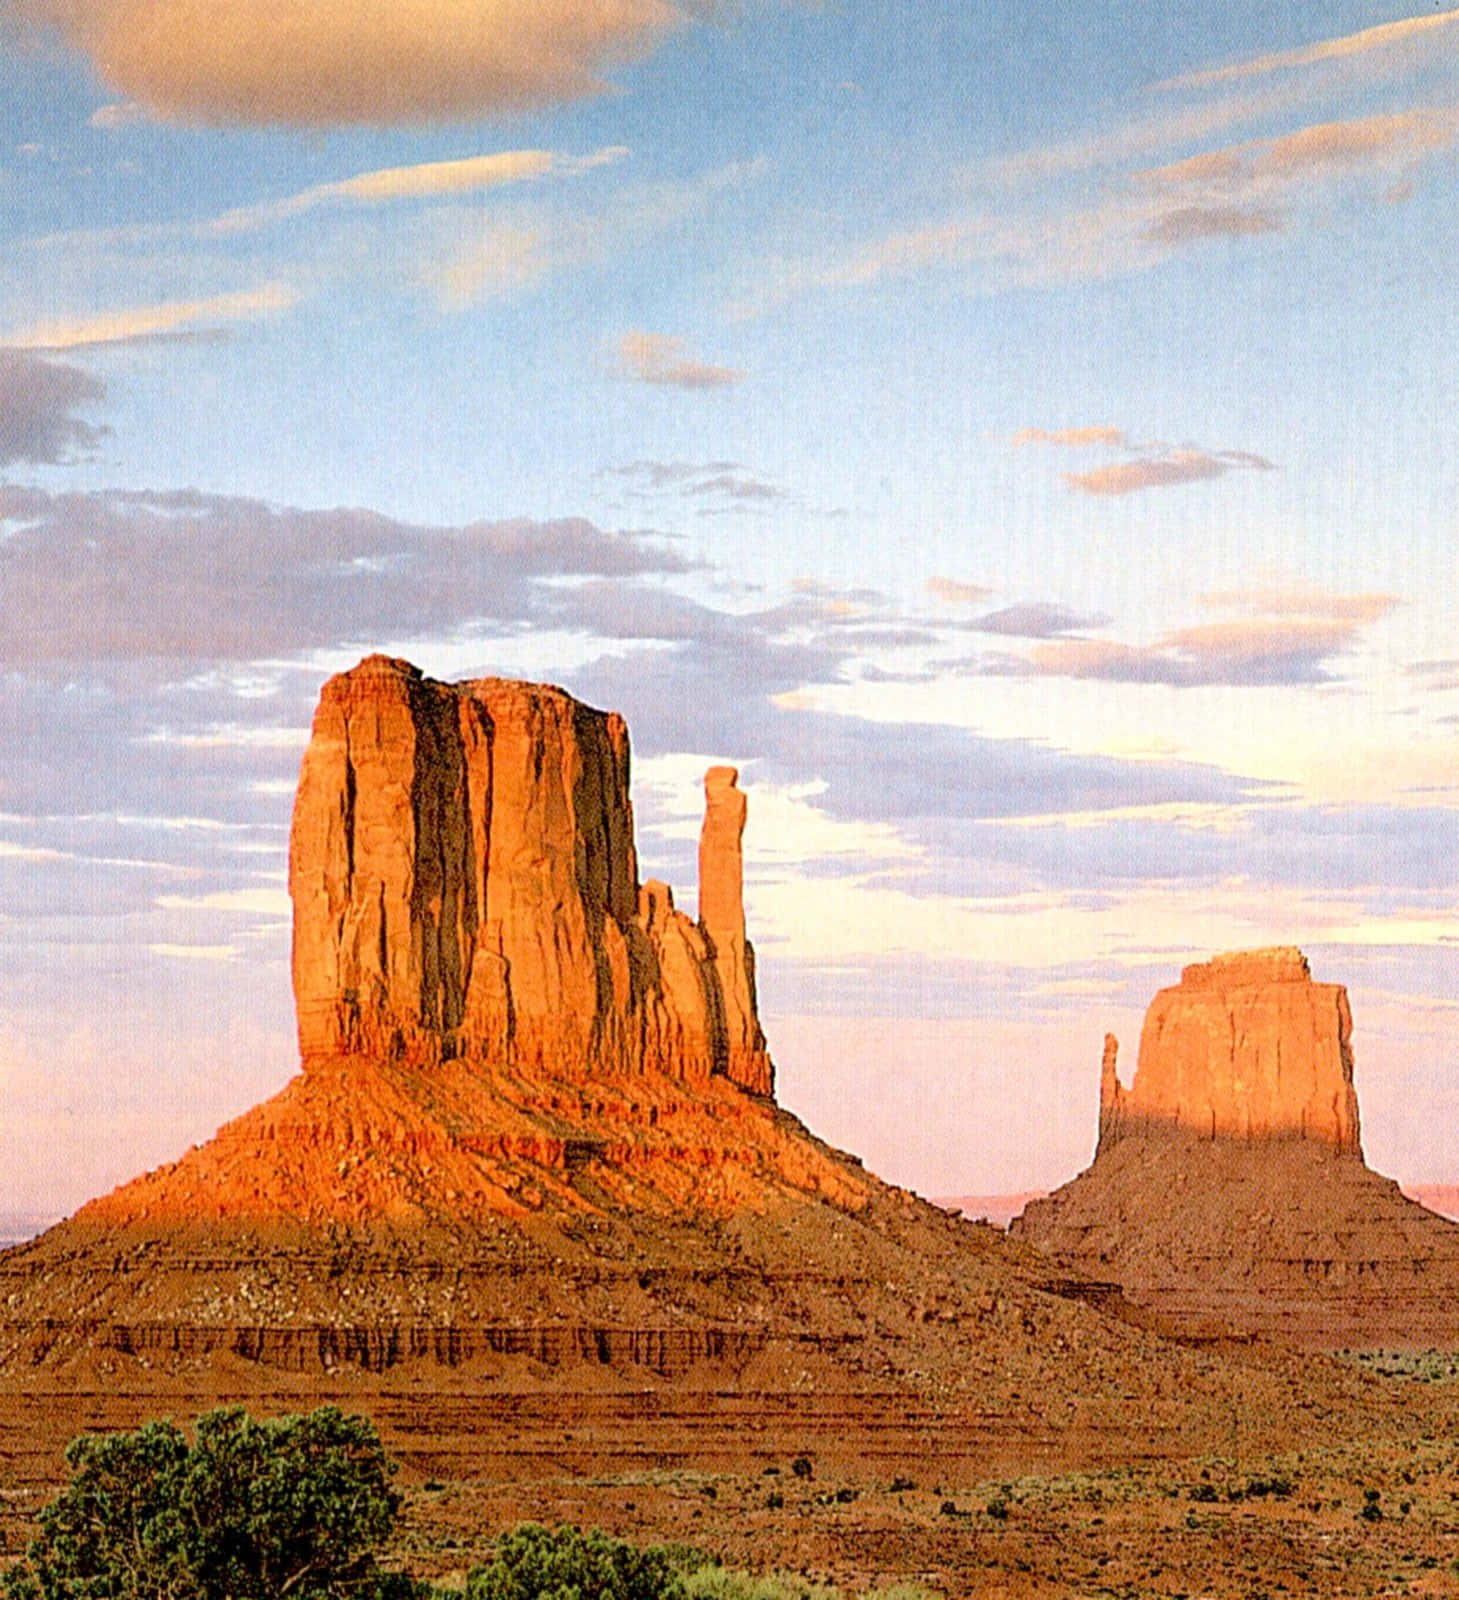 Monument Valley Navajo Tribal Park The Mittens View Wallpaper